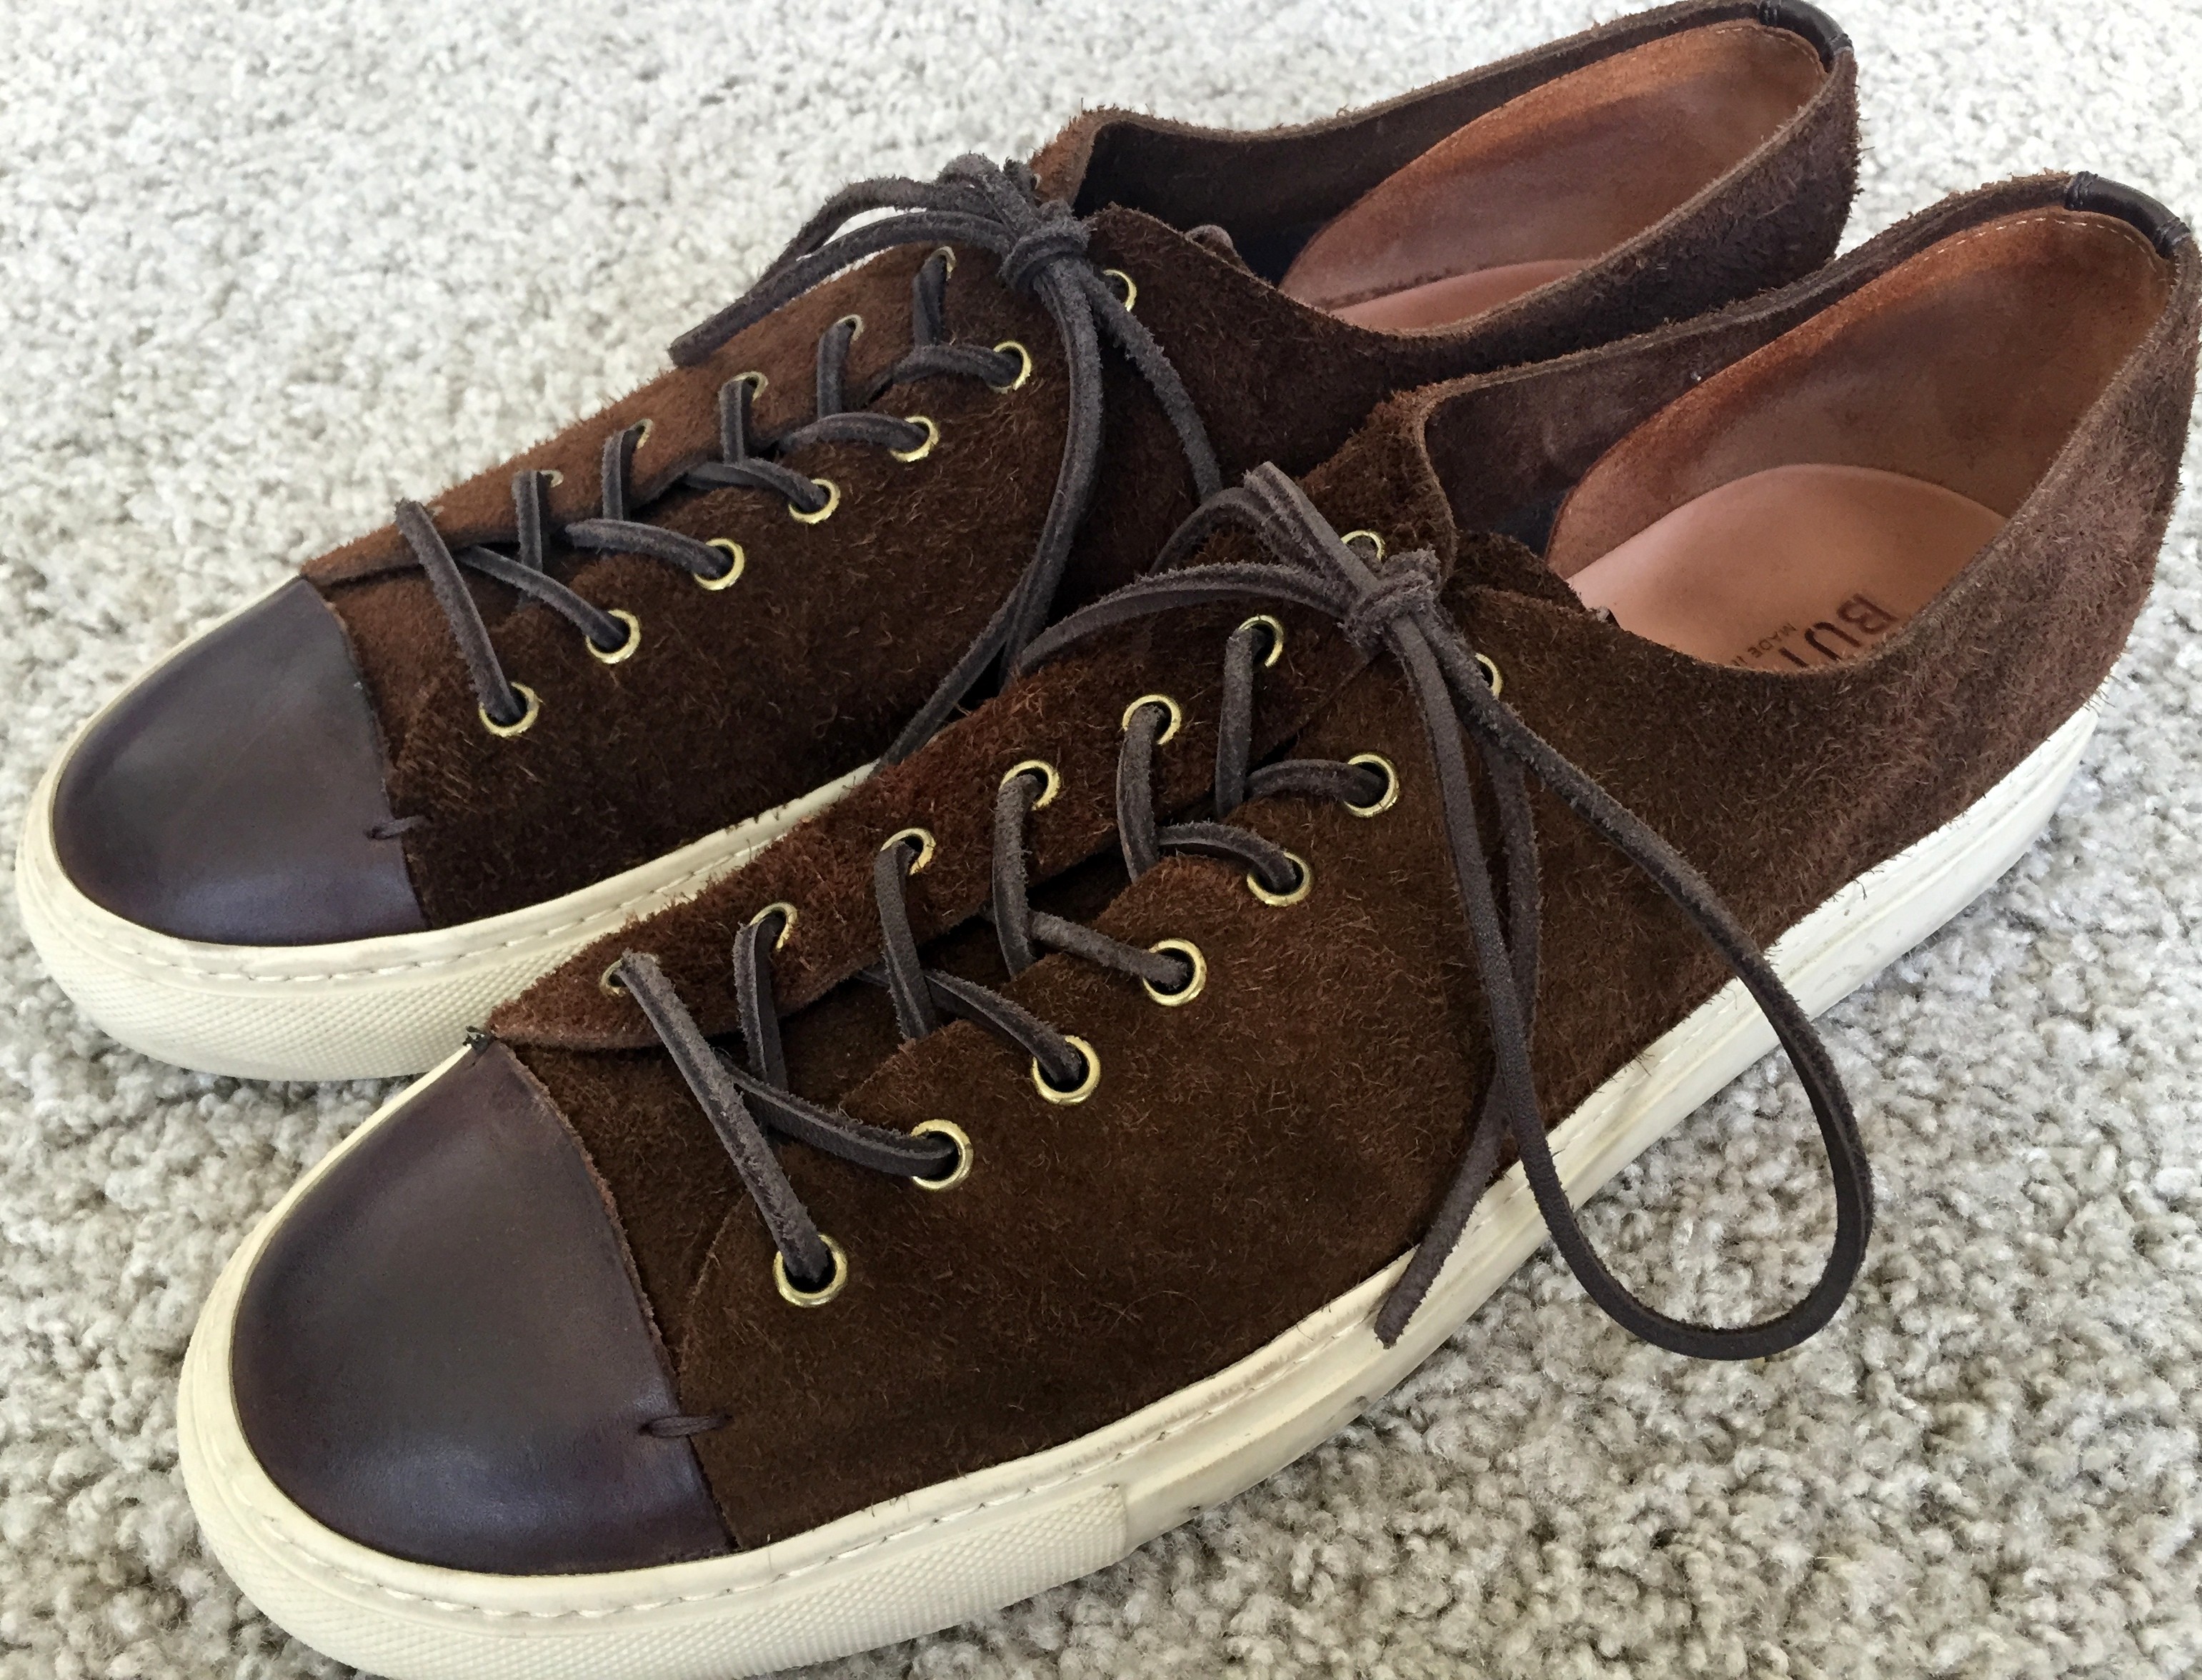 9/4 PRICE DROP! BUTTERO TANINO LOW - SUEDE w/LEATHER TOE - SIZE 45 |  Styleforum